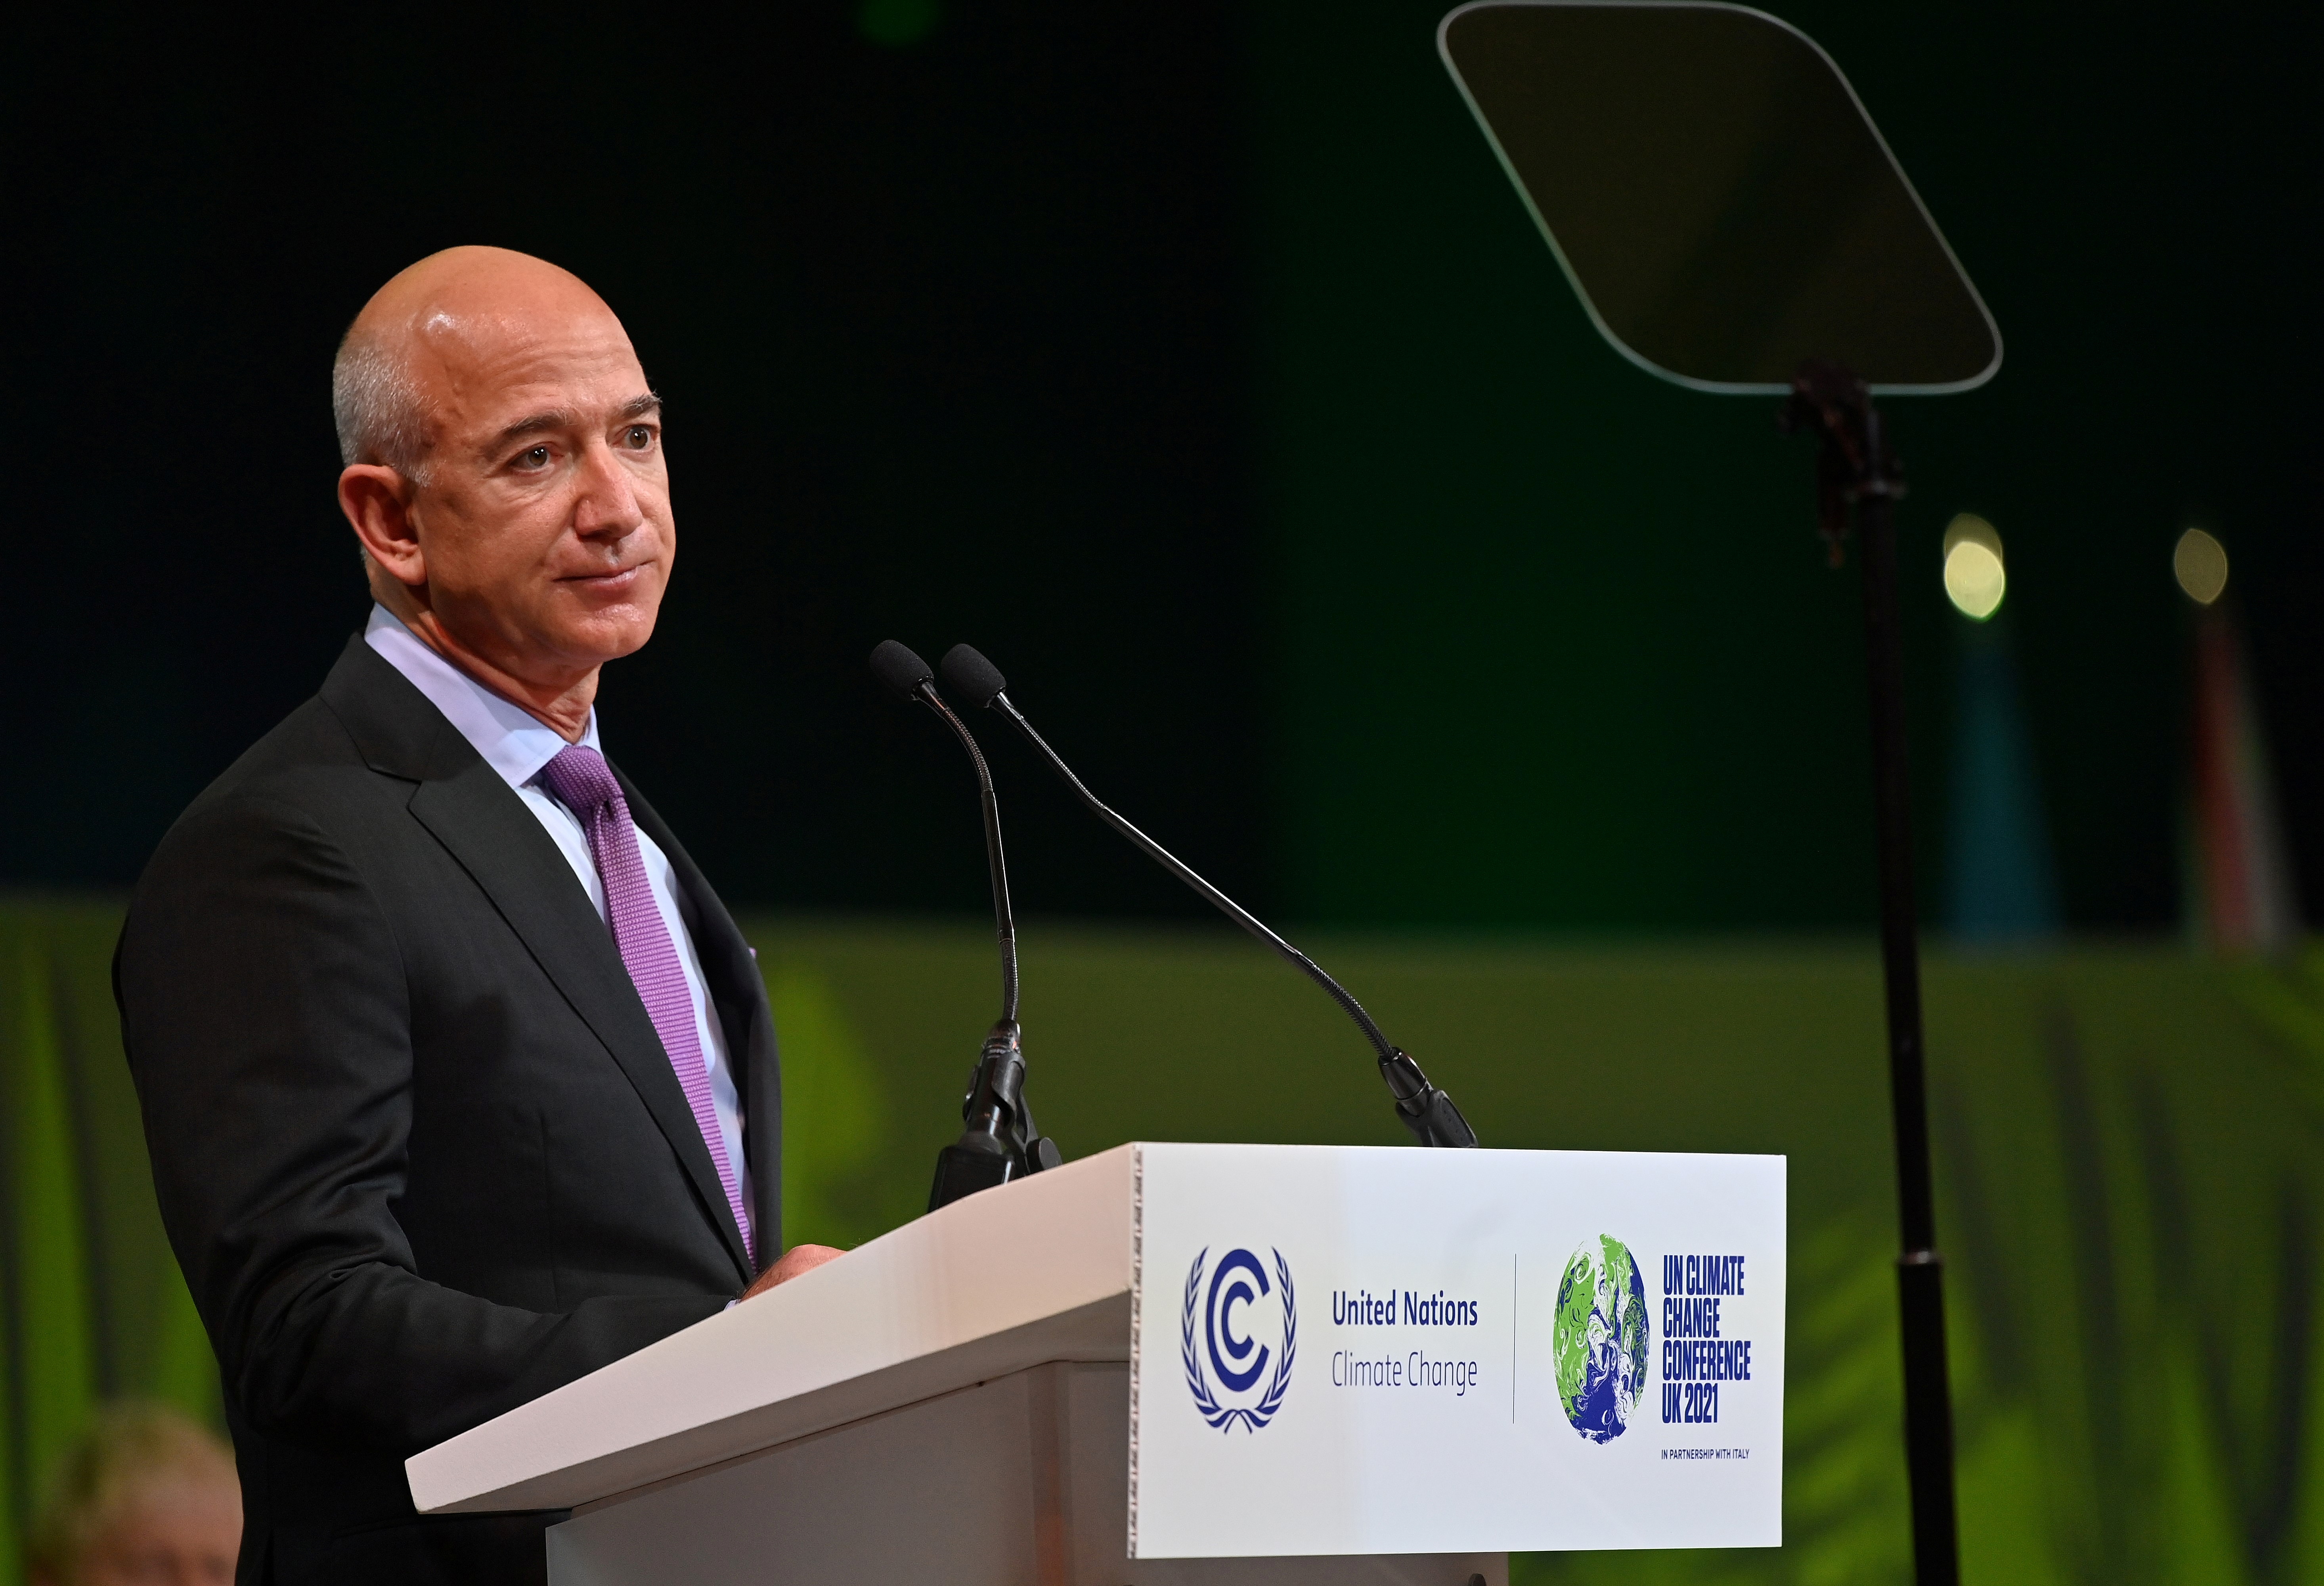 Amazon CEO Jeff Bezos gestures as he delivers a speech during the UN Climate Change Conference (COP26) in Glasgow, Scotland, Britain, November 2, 2021.